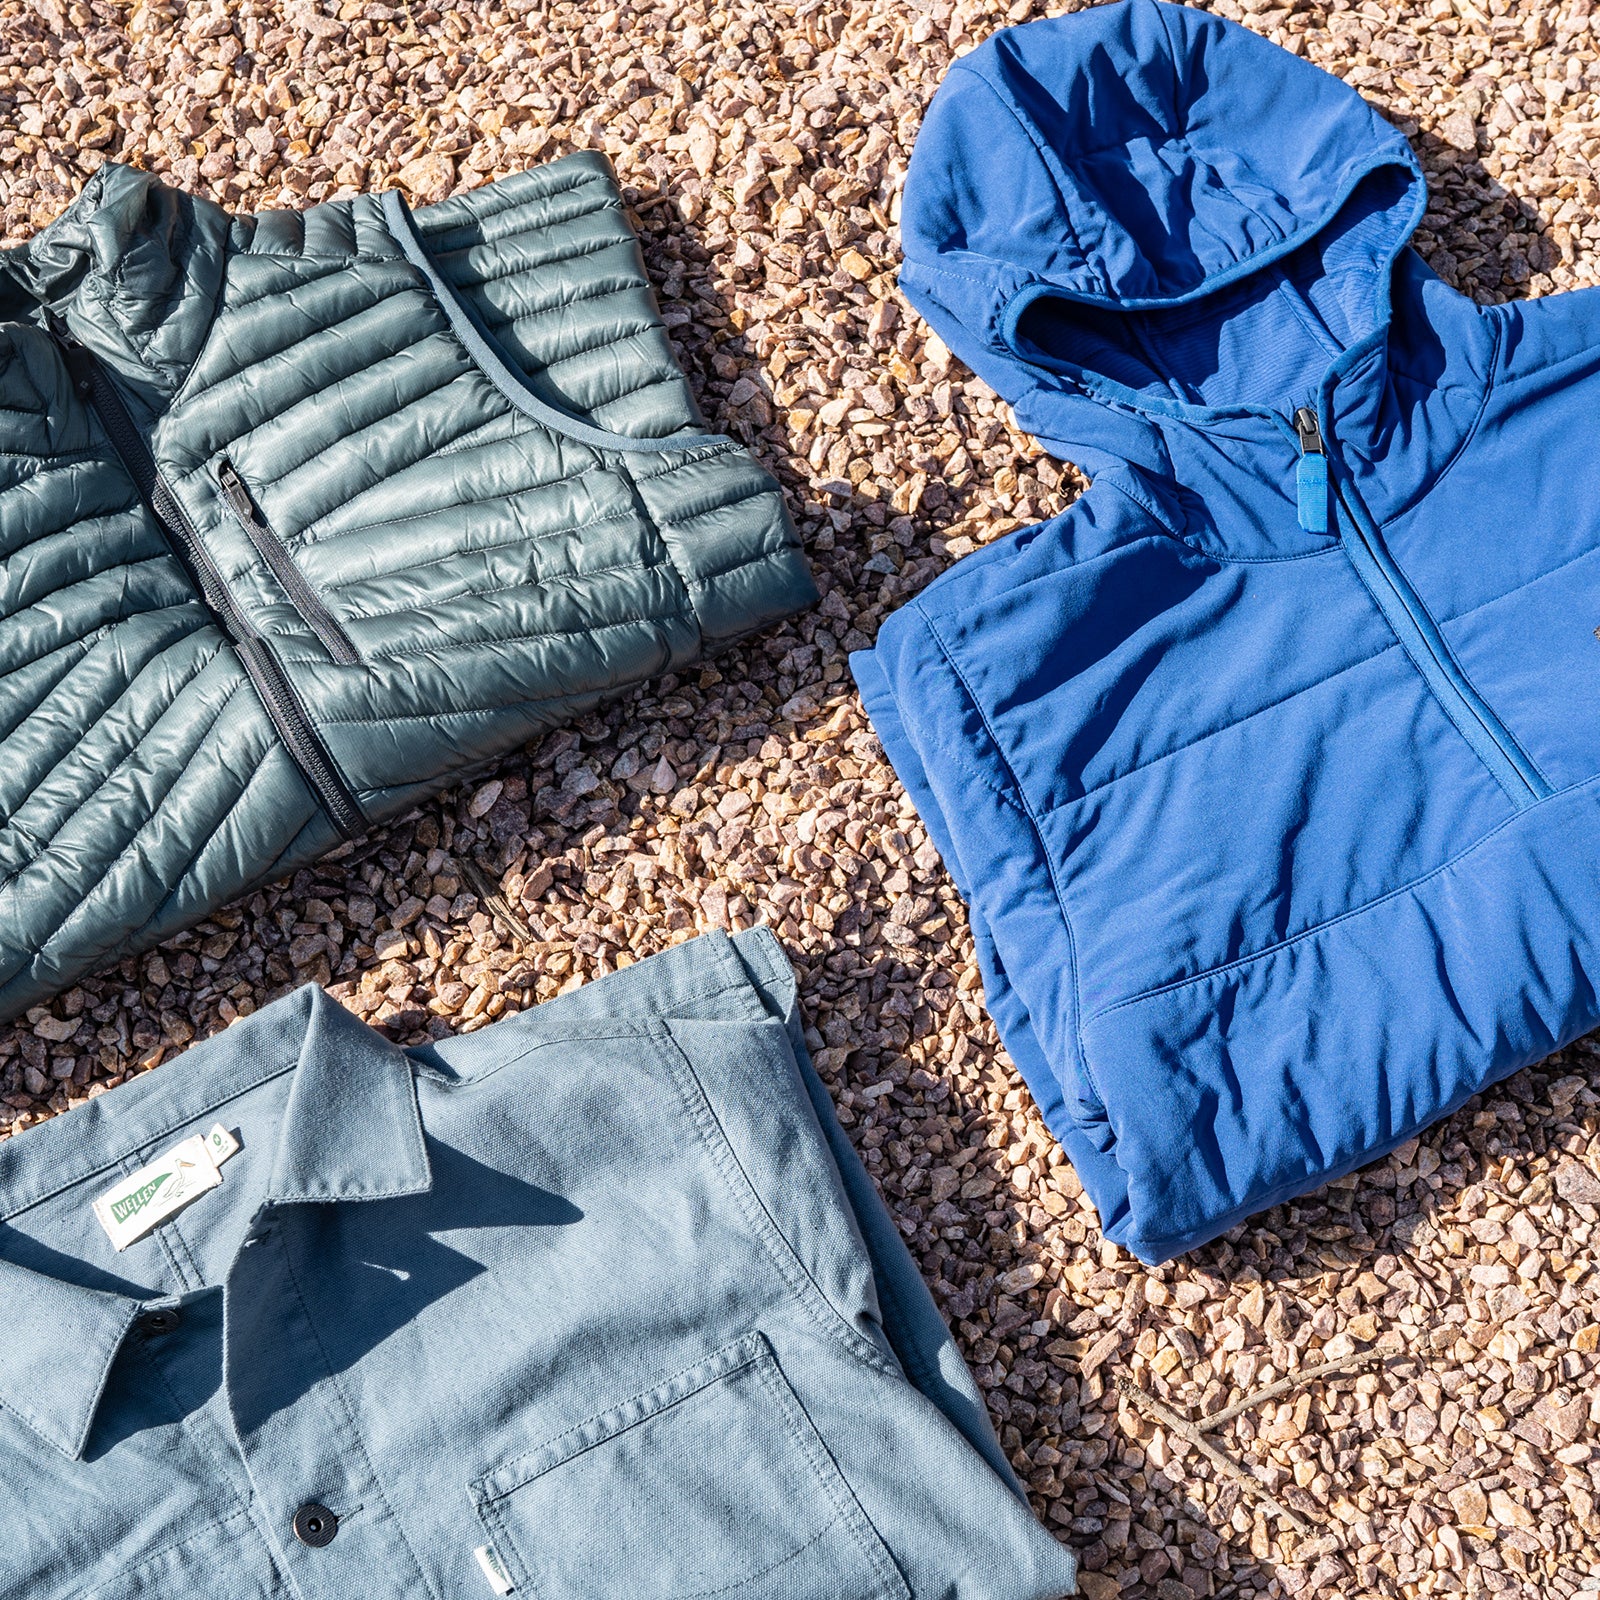 A Utility Vest is the Only Late Summer Layering Piece You Need